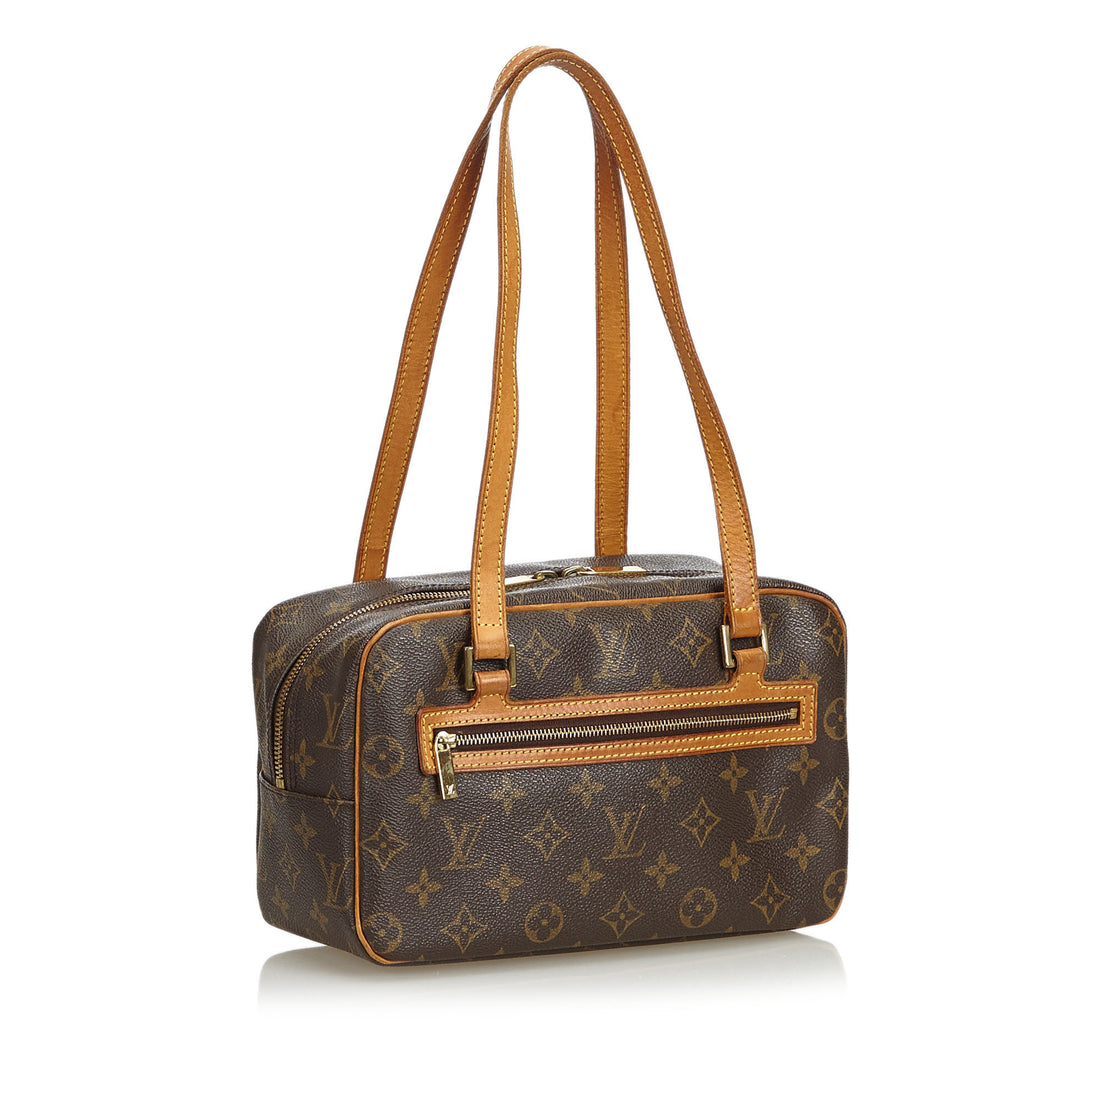 Buy Free Shipping [Used] Louis Vuitton Monogram Cite MM Shoulder bag  Shoulder bag M51182 Brown PVC bag M51182 from Japan - Buy authentic Plus  exclusive items from Japan